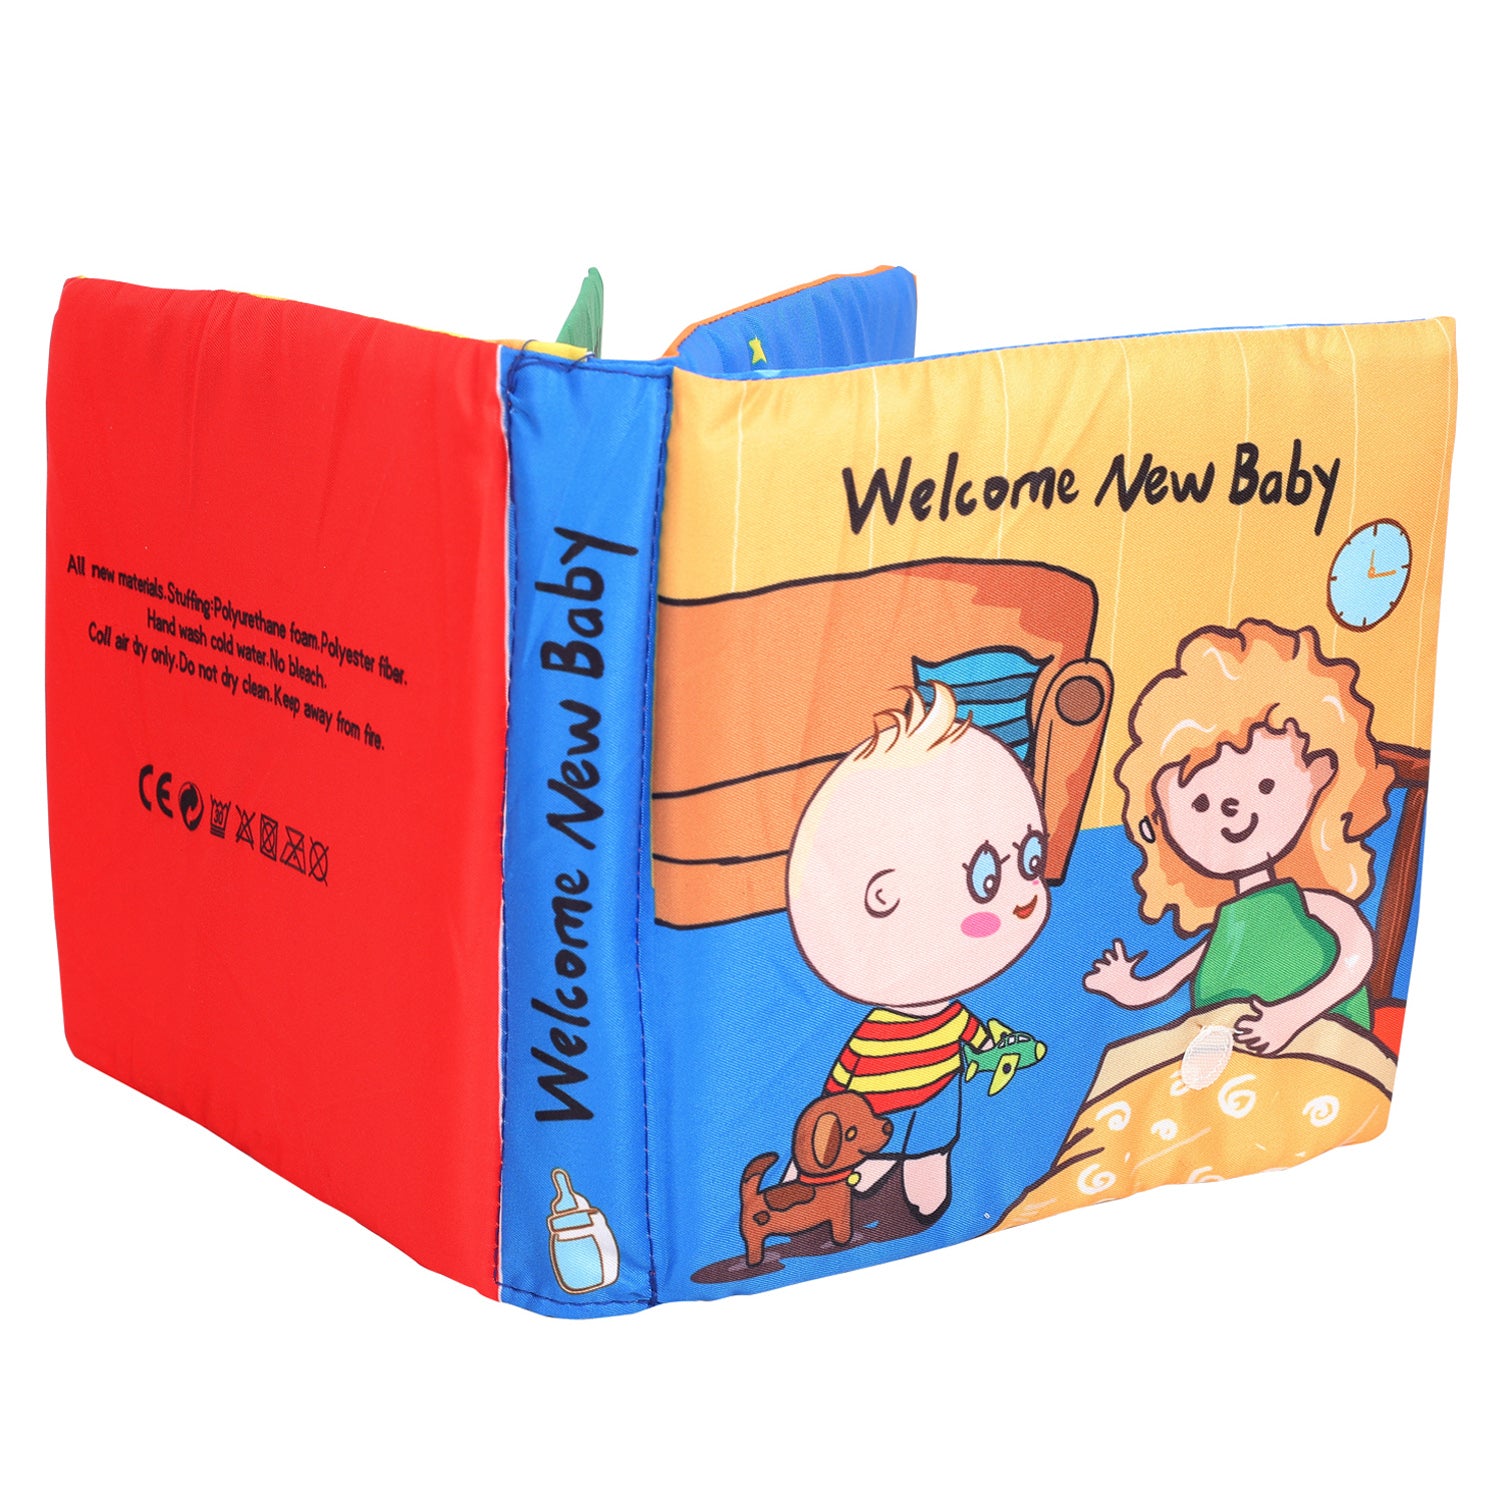 Welcome New Baby Multicolour Activity Cloth Book - Baby Moo